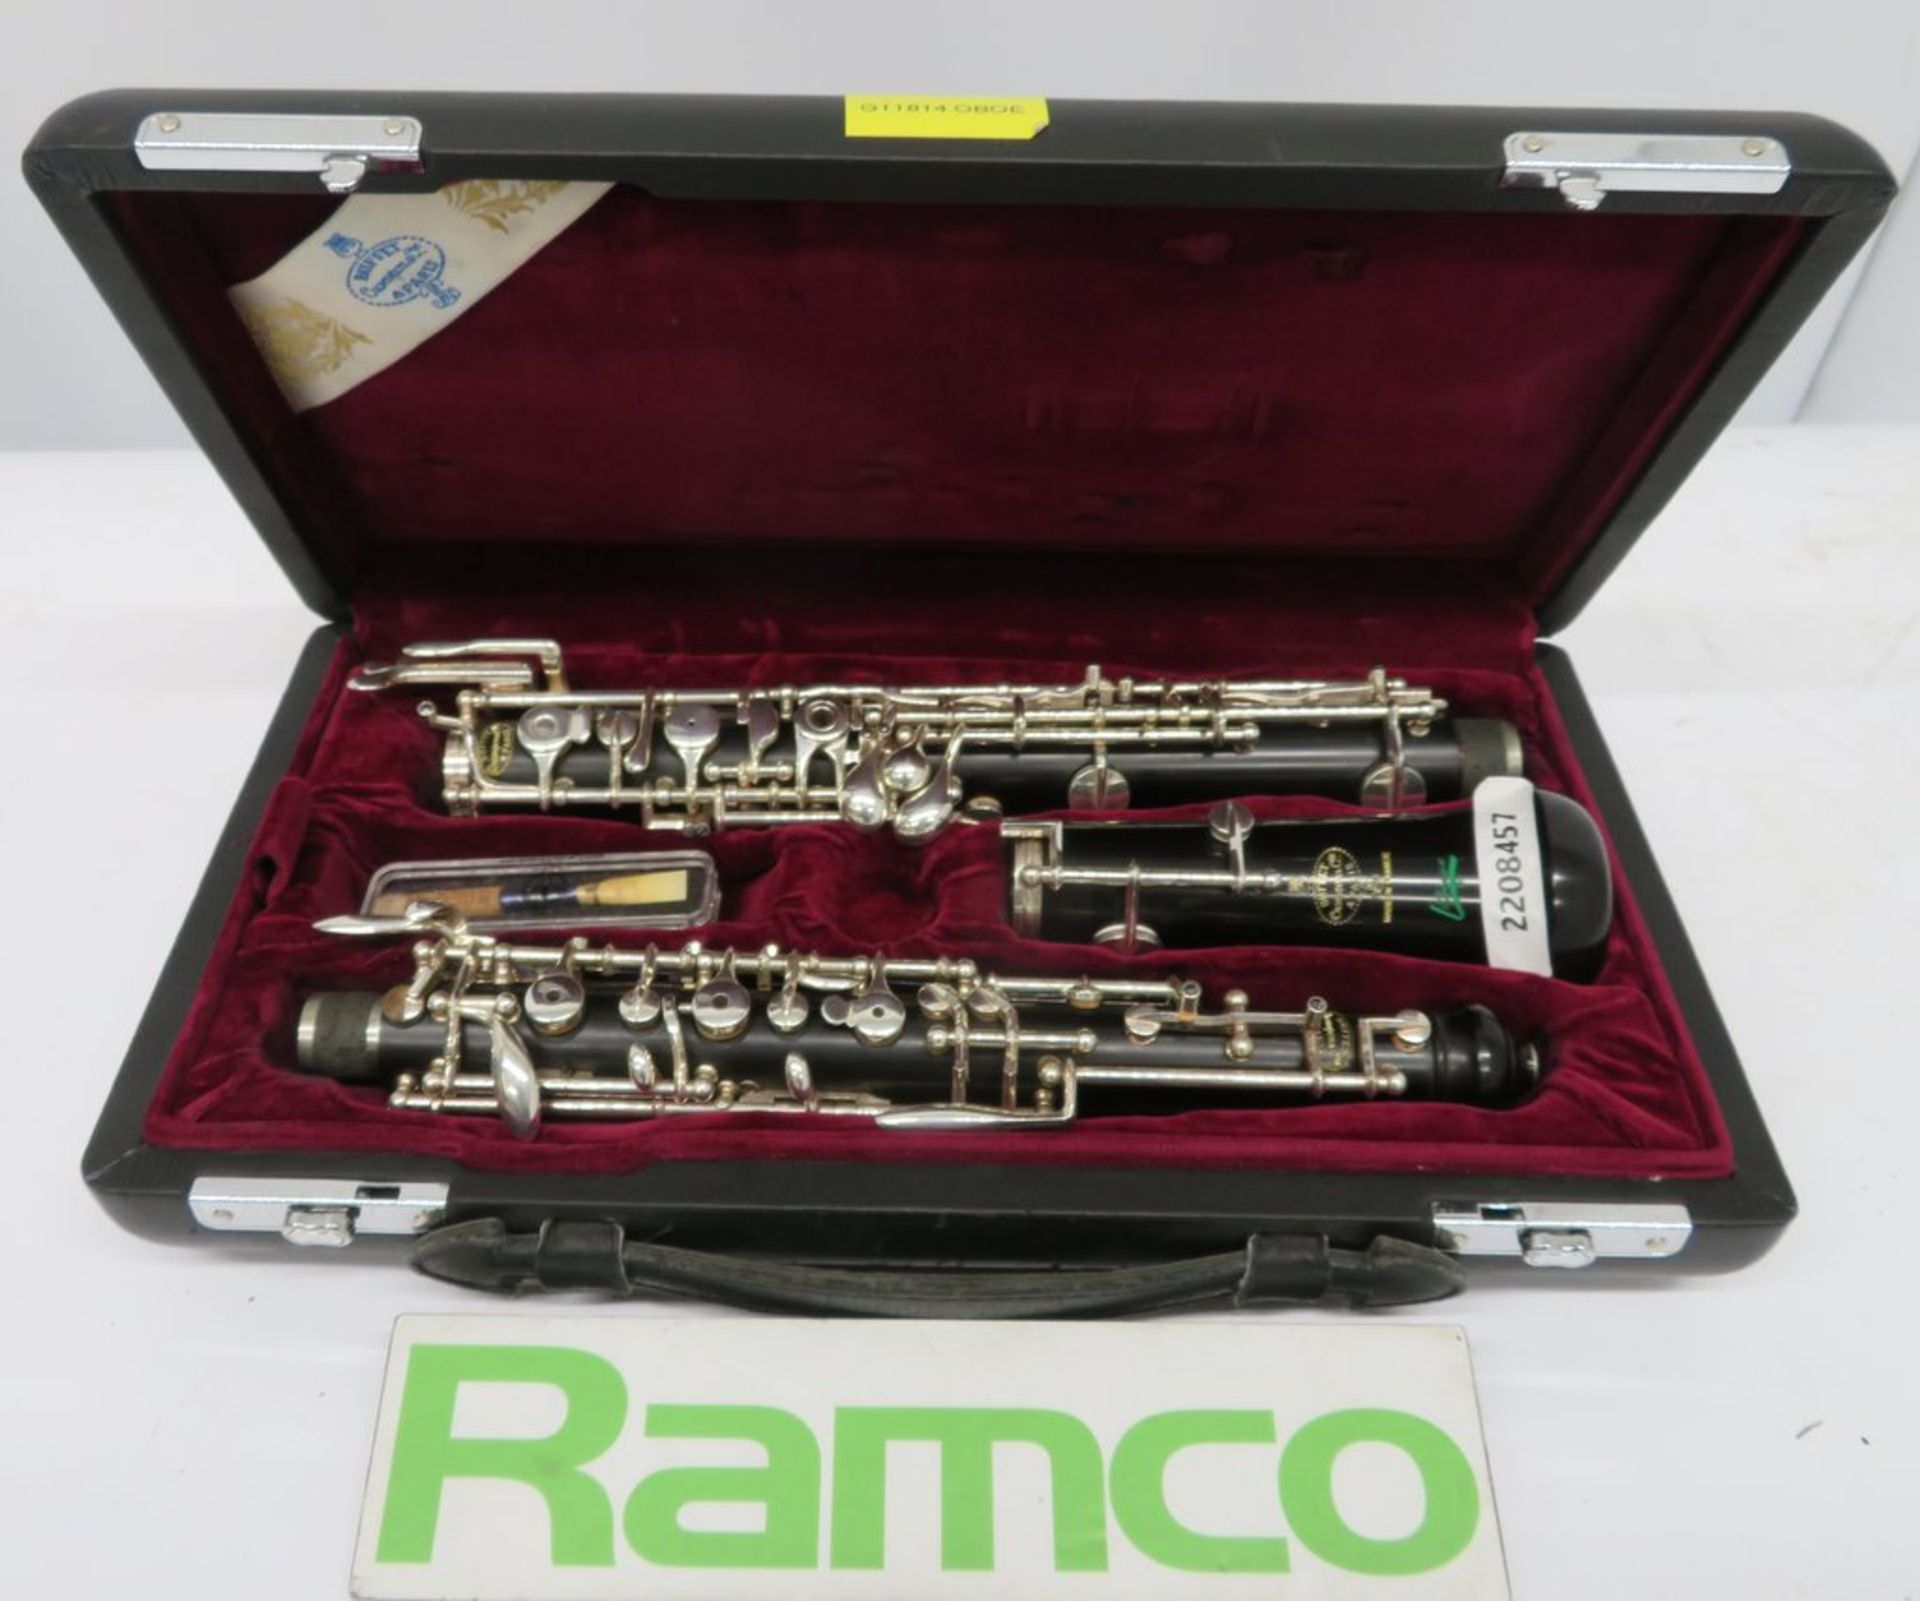 Buffet Green Line BC Oboe With Case. Serial Number: G11814. Please Note That This Item Has